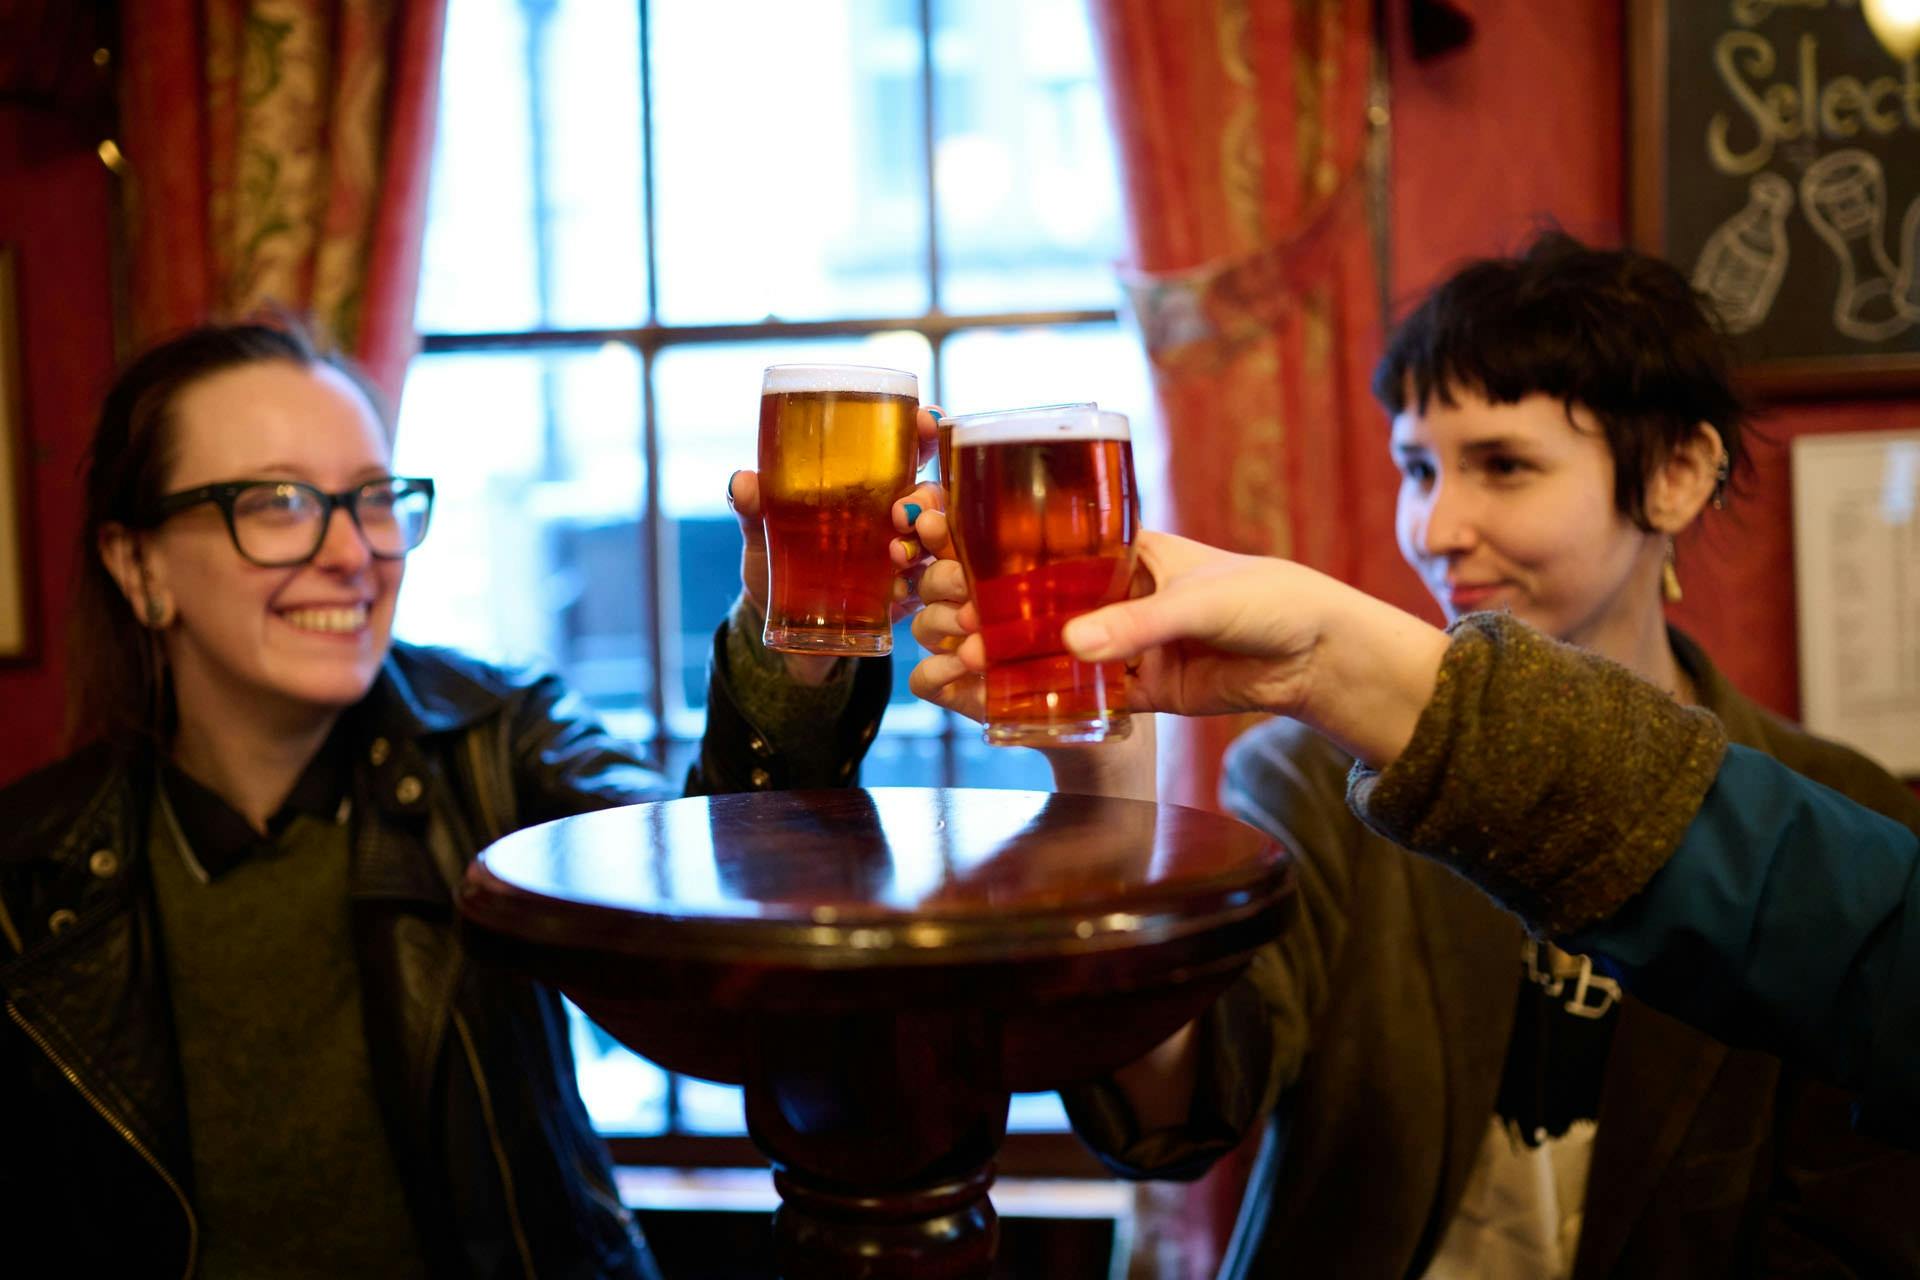 London's historic pubs guided food tour